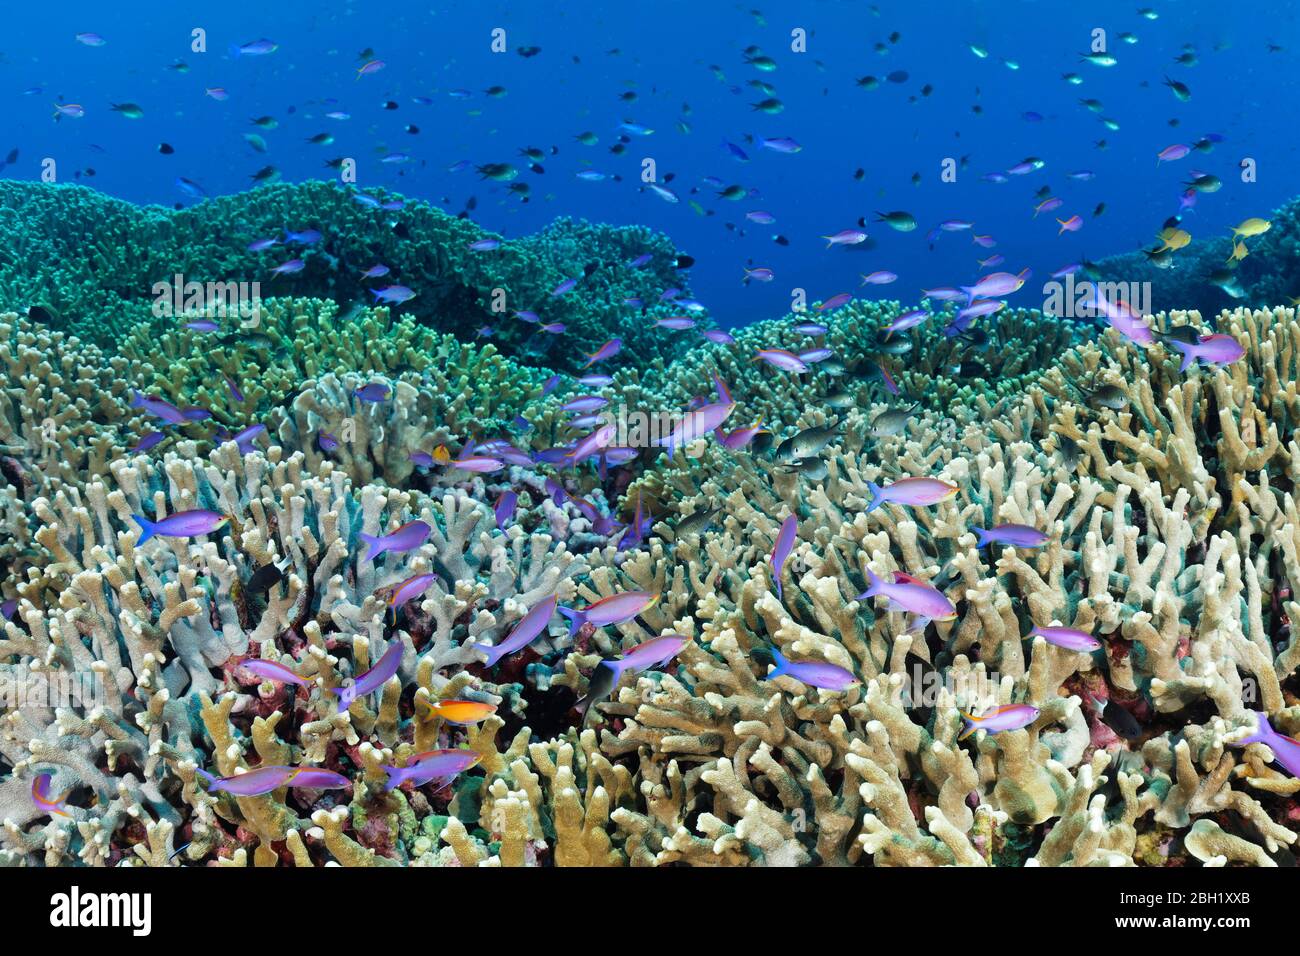 Coral reef, reef top, small polyp stony coral sp (Porites attenuata), shoal of fish Yellowstriped fairy basslets (Pseudanthias tuka), Pacific Ocean Stock Photo